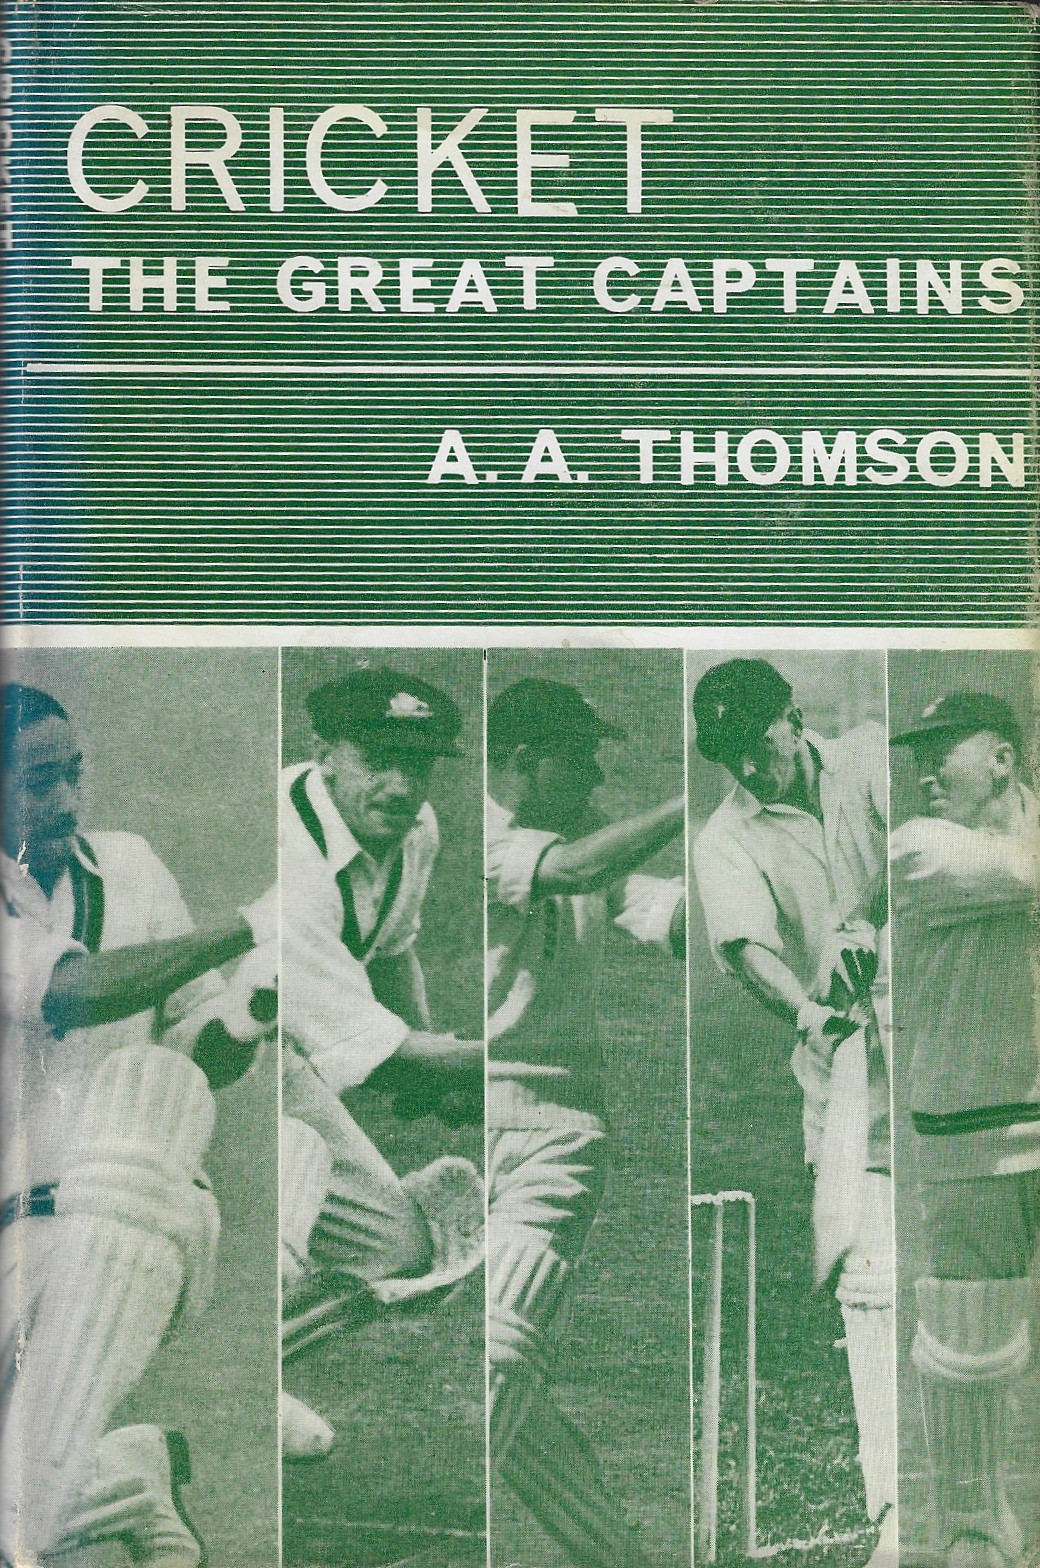 Thomson, A.A. - Cricket - The great captains